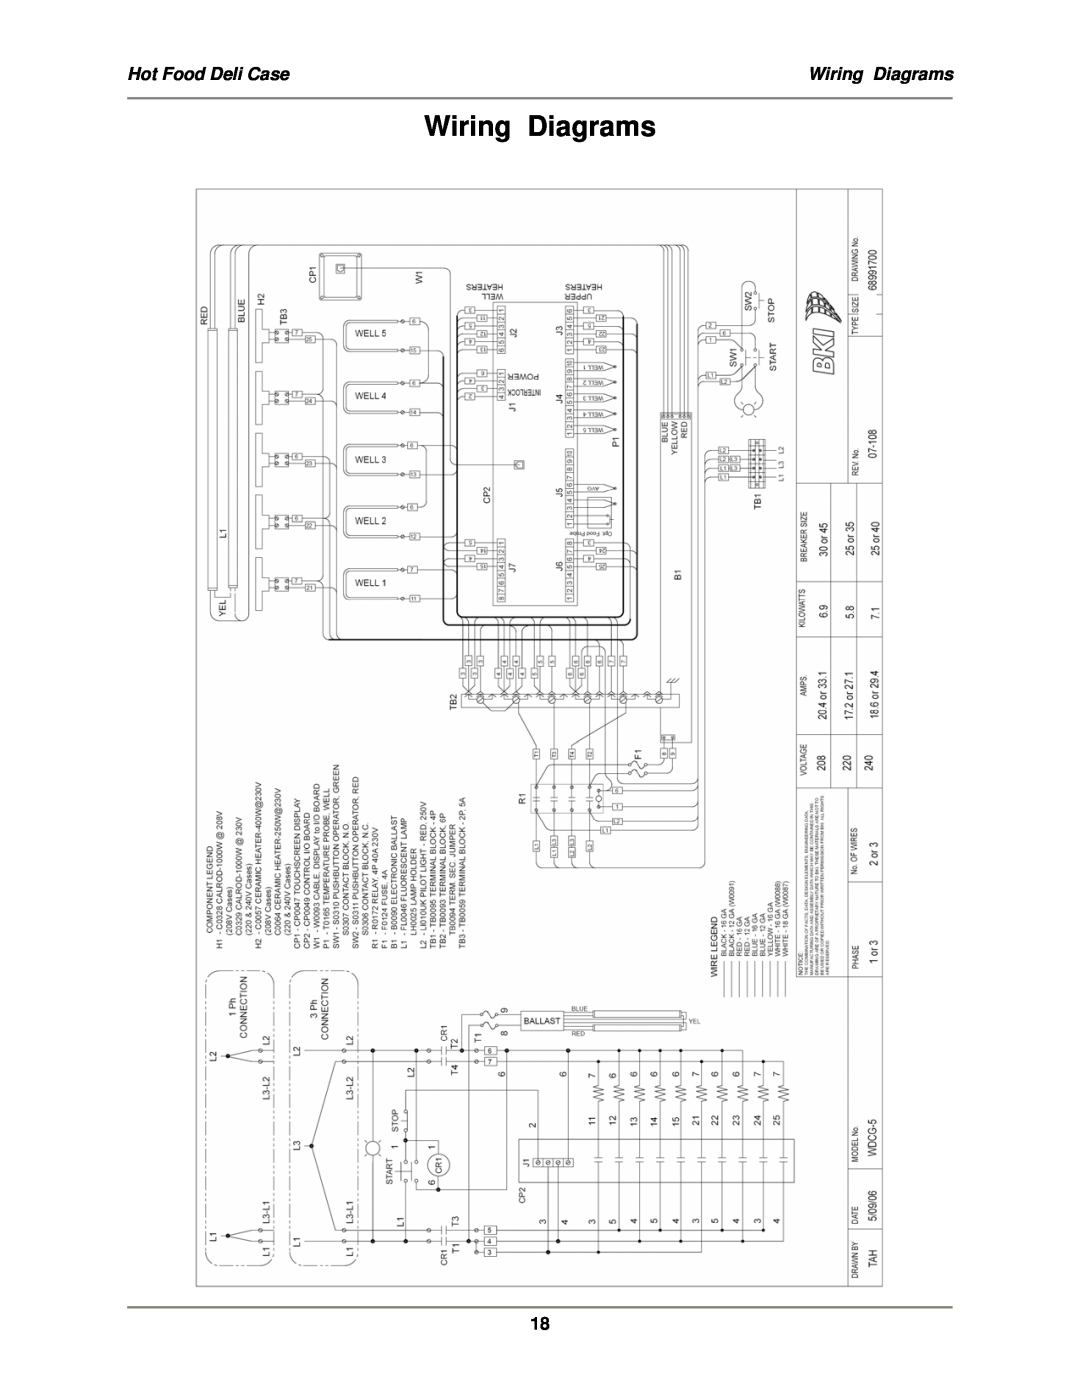 Bakers Pride Oven CSWG, WDCG, SSWG operation manual Wiring Diagrams, Hot Food Deli Case 